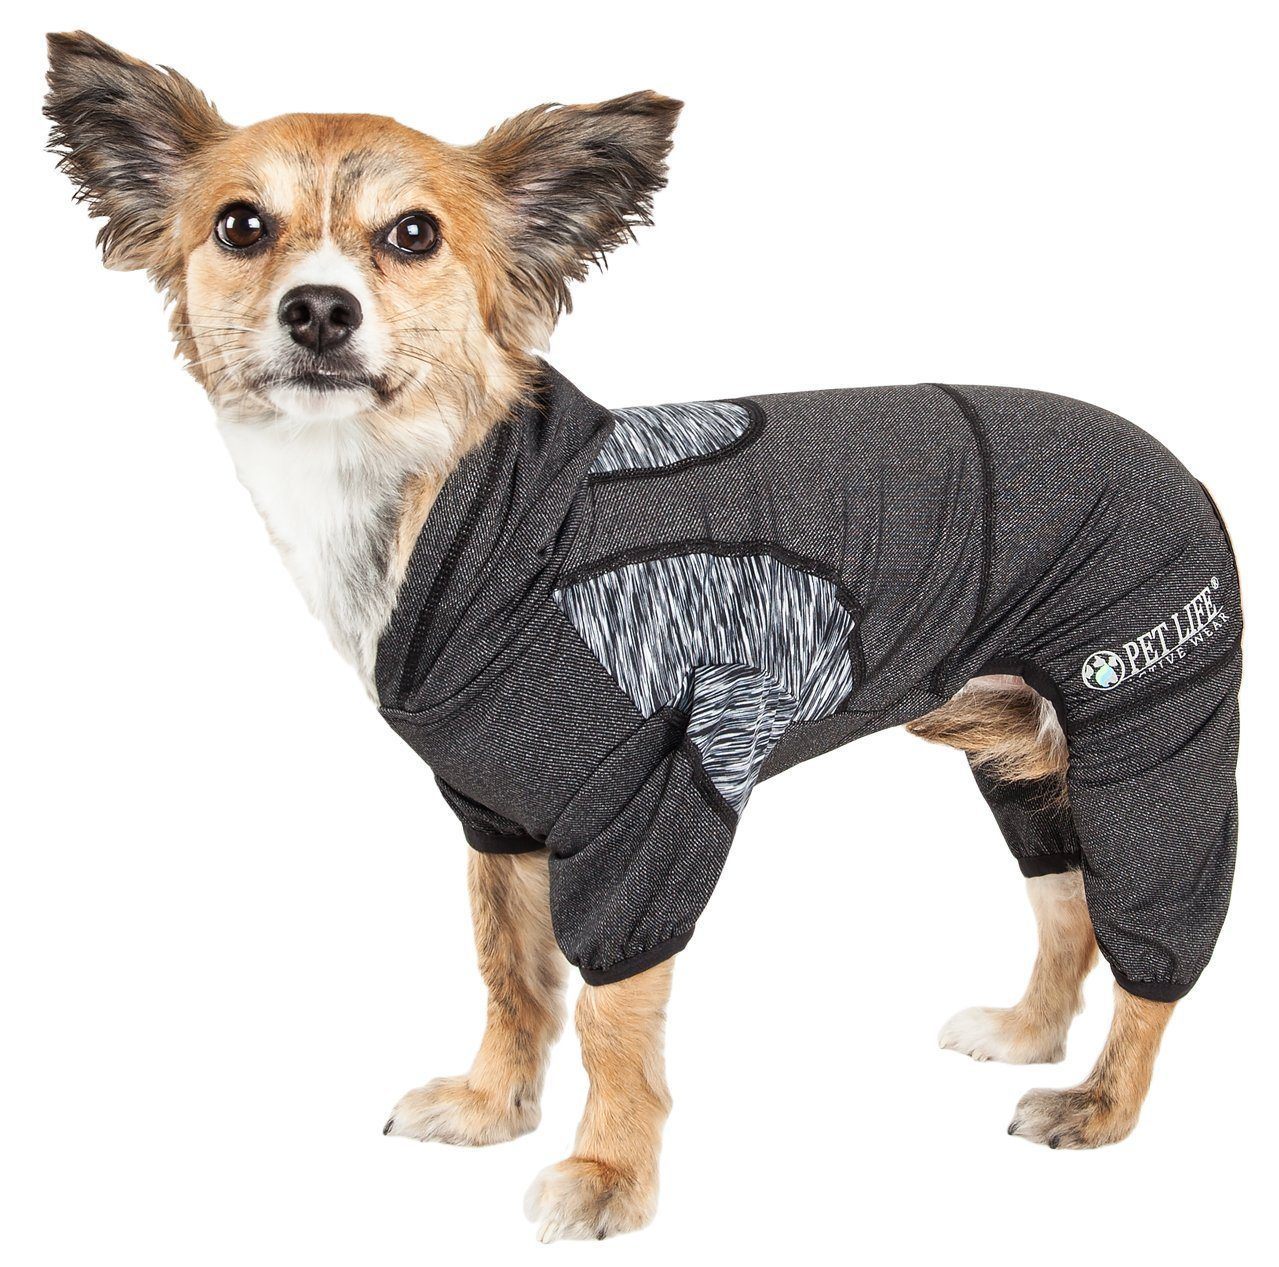 Pet Life ® Active 'Pawsterity' Mediumweight 4-Way-Stretch Yoga Fitness Dog Tracksuit Hoodie X-Small Black